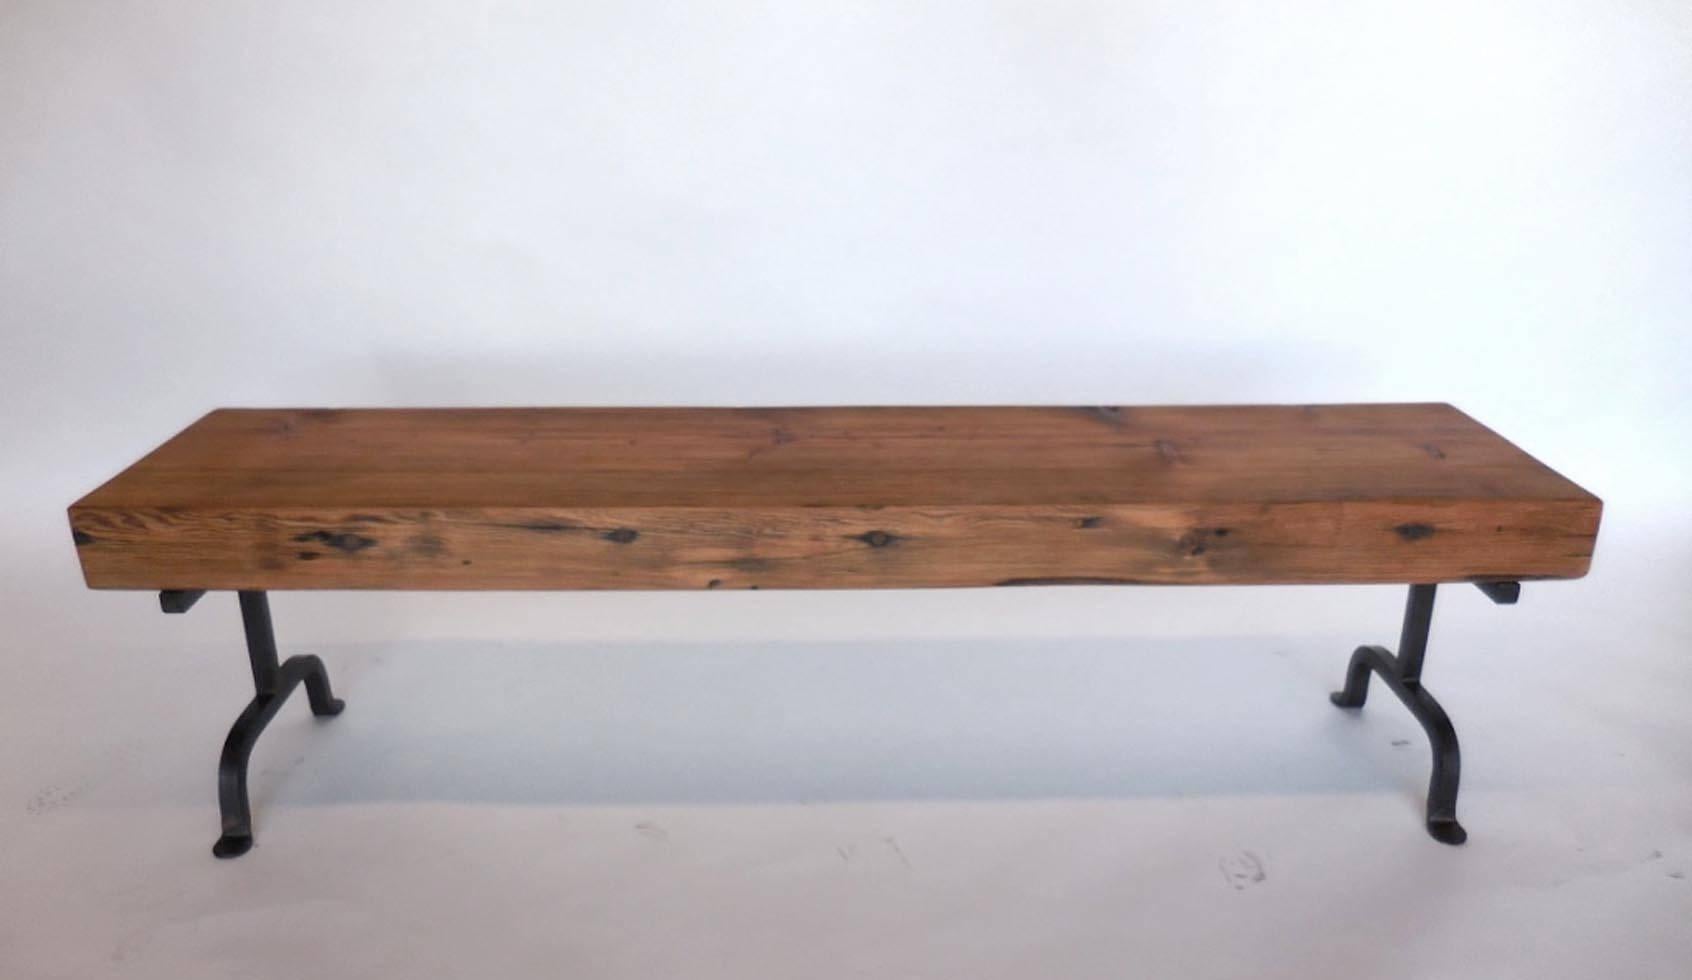 American Dos Gallos Custom Rustic Wood and Iron Bench